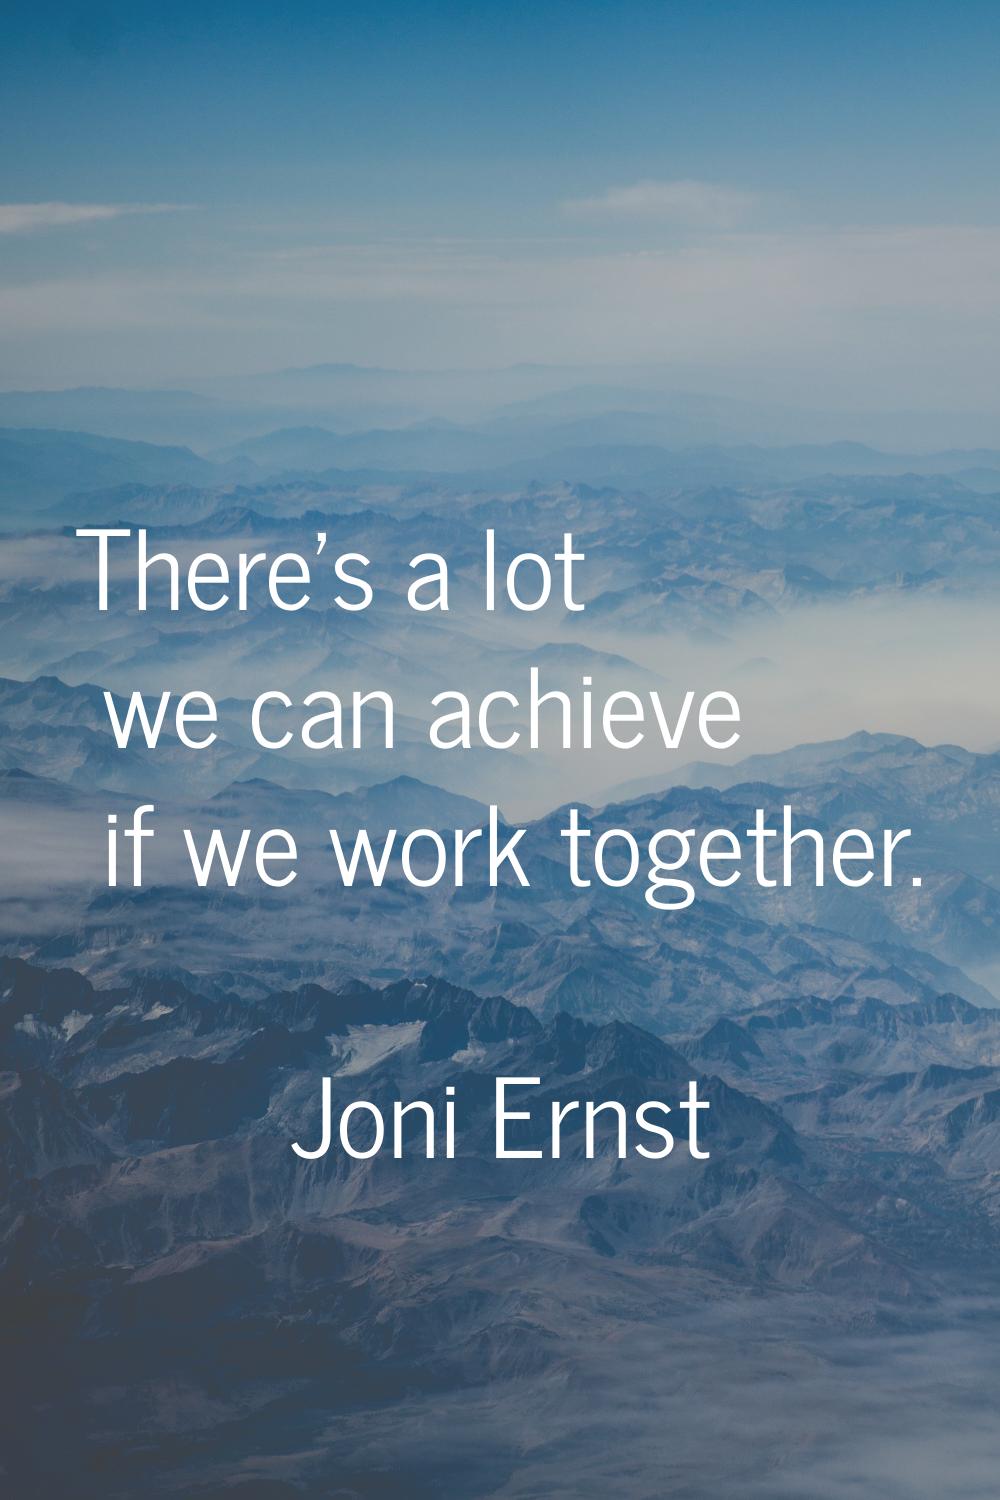 There's a lot we can achieve if we work together.